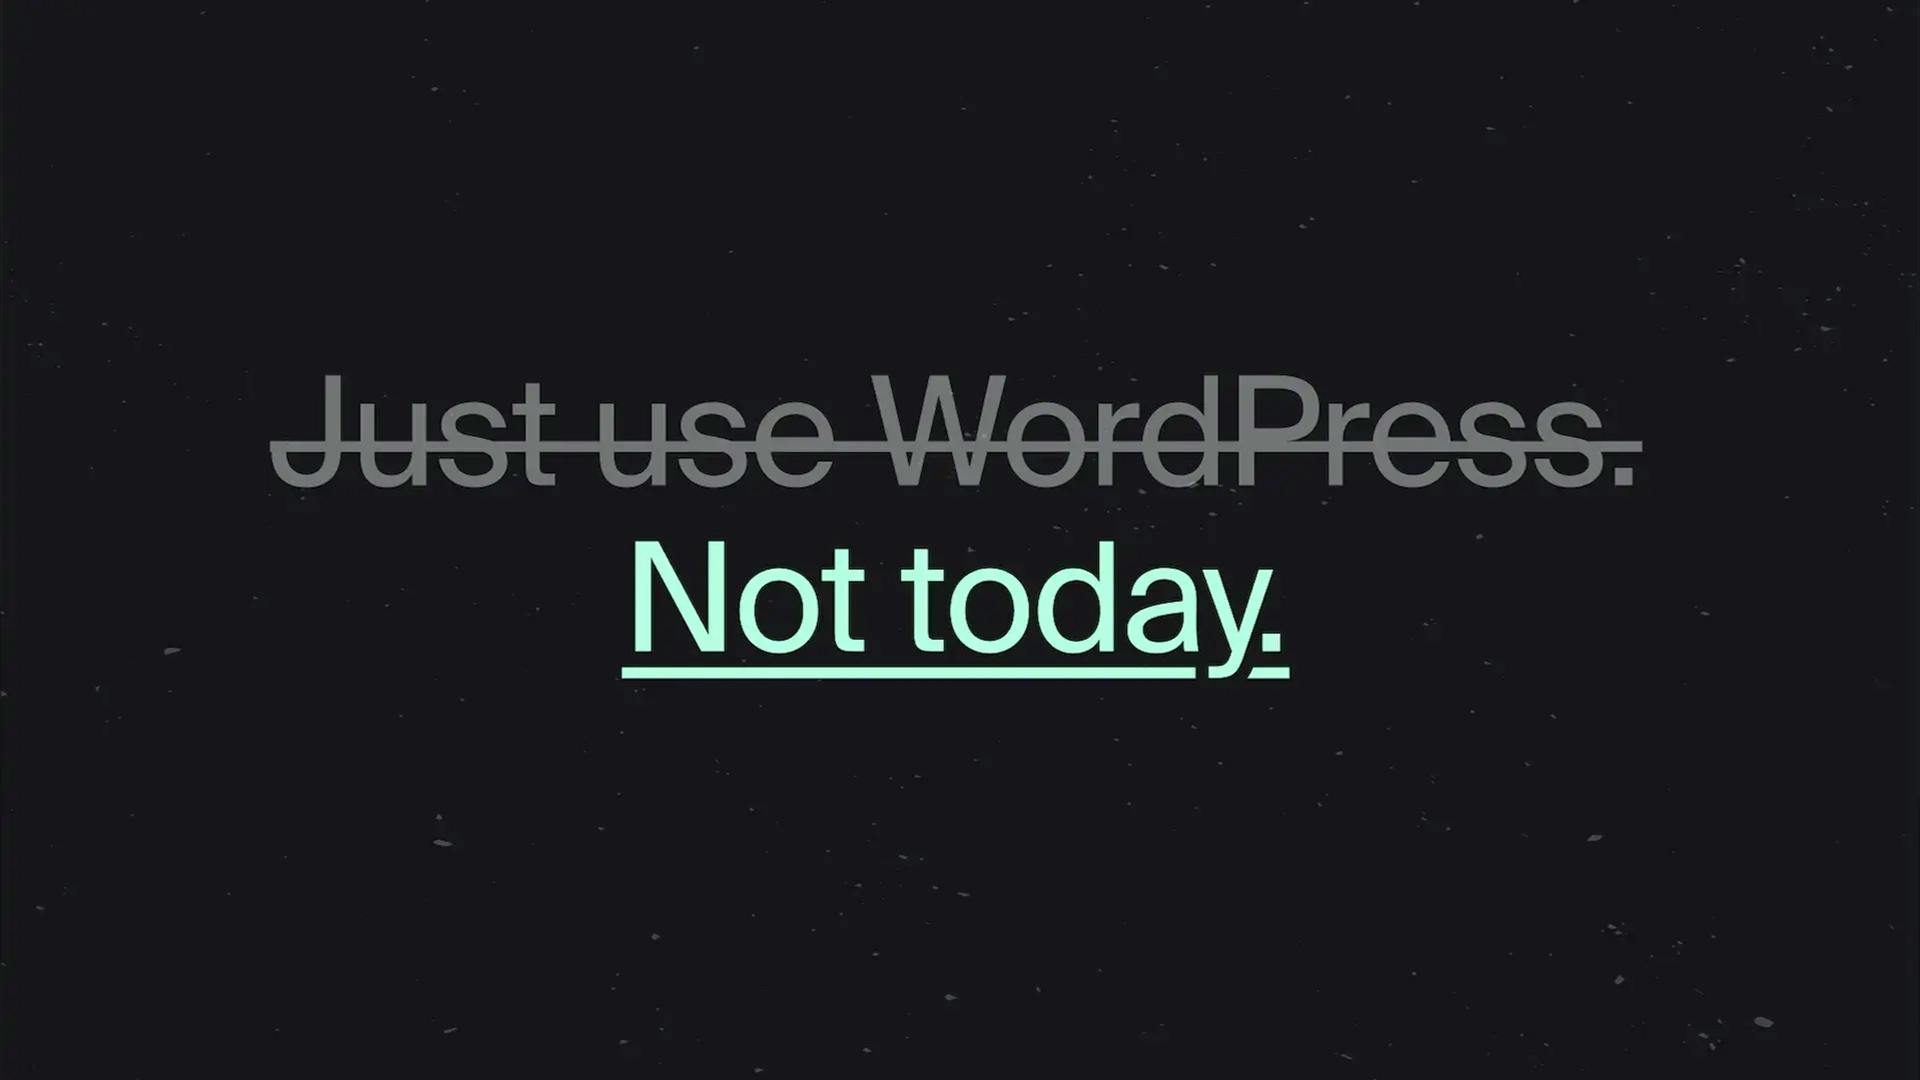 It's 2022 - time to stop using headless WordPress and ACF